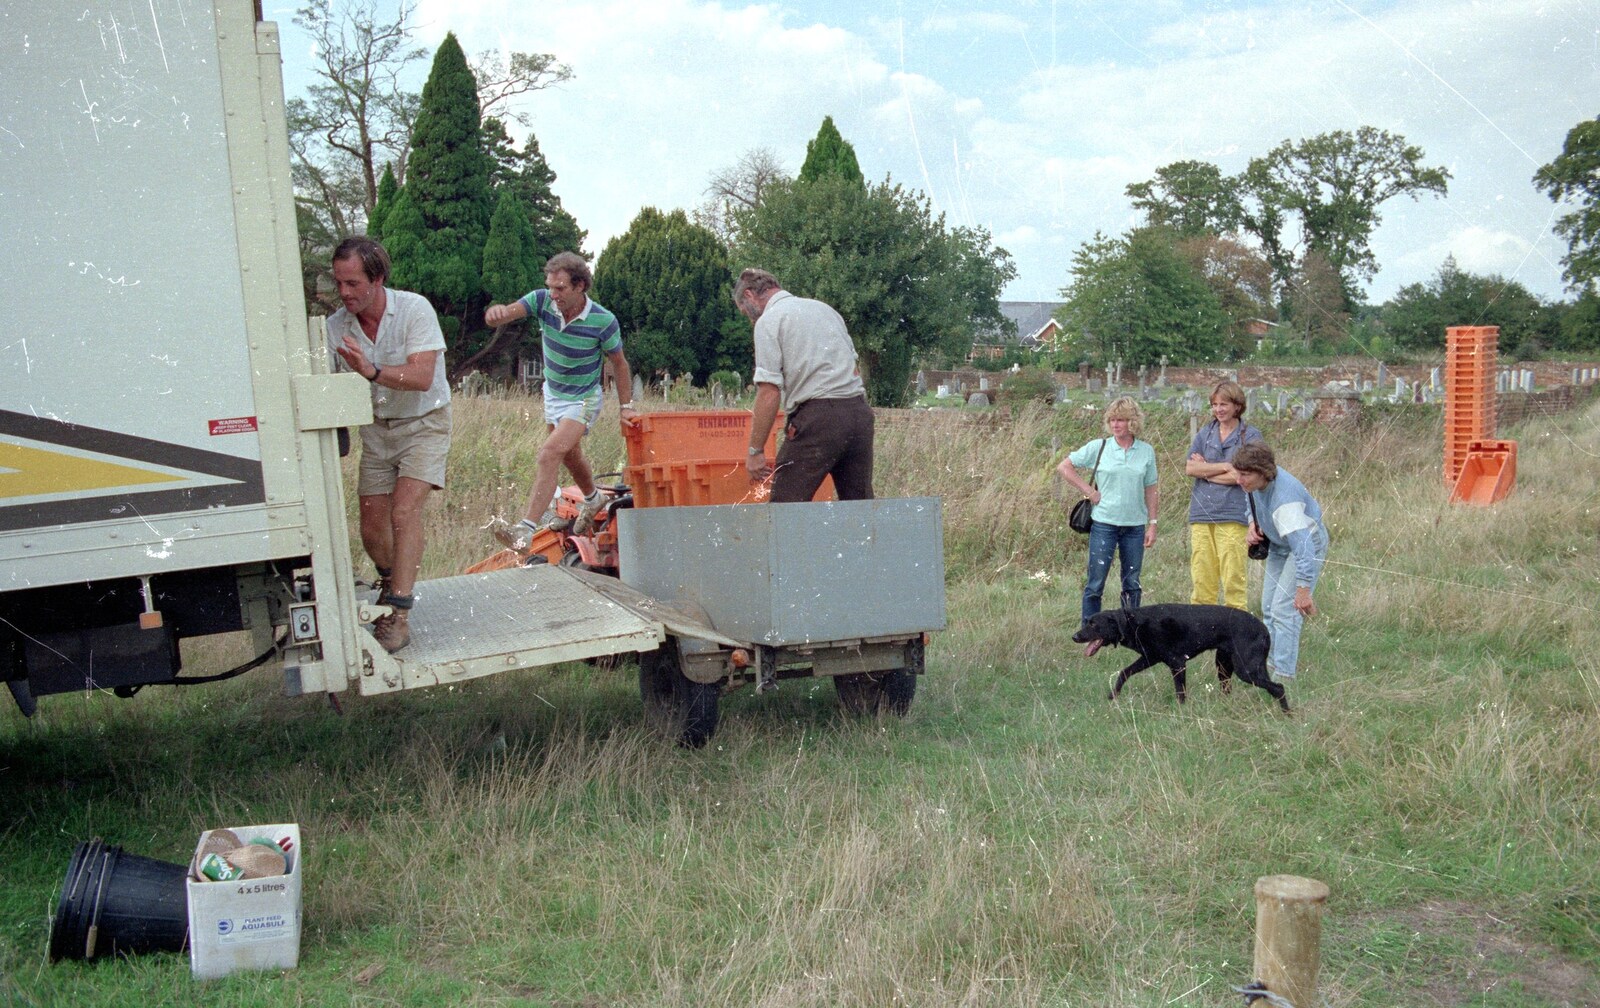 Grapes are loaded in to the back of a van from Harrow Vineyard Harvest and Wootton Winery, Dorset and Somerset - 5th September 1989